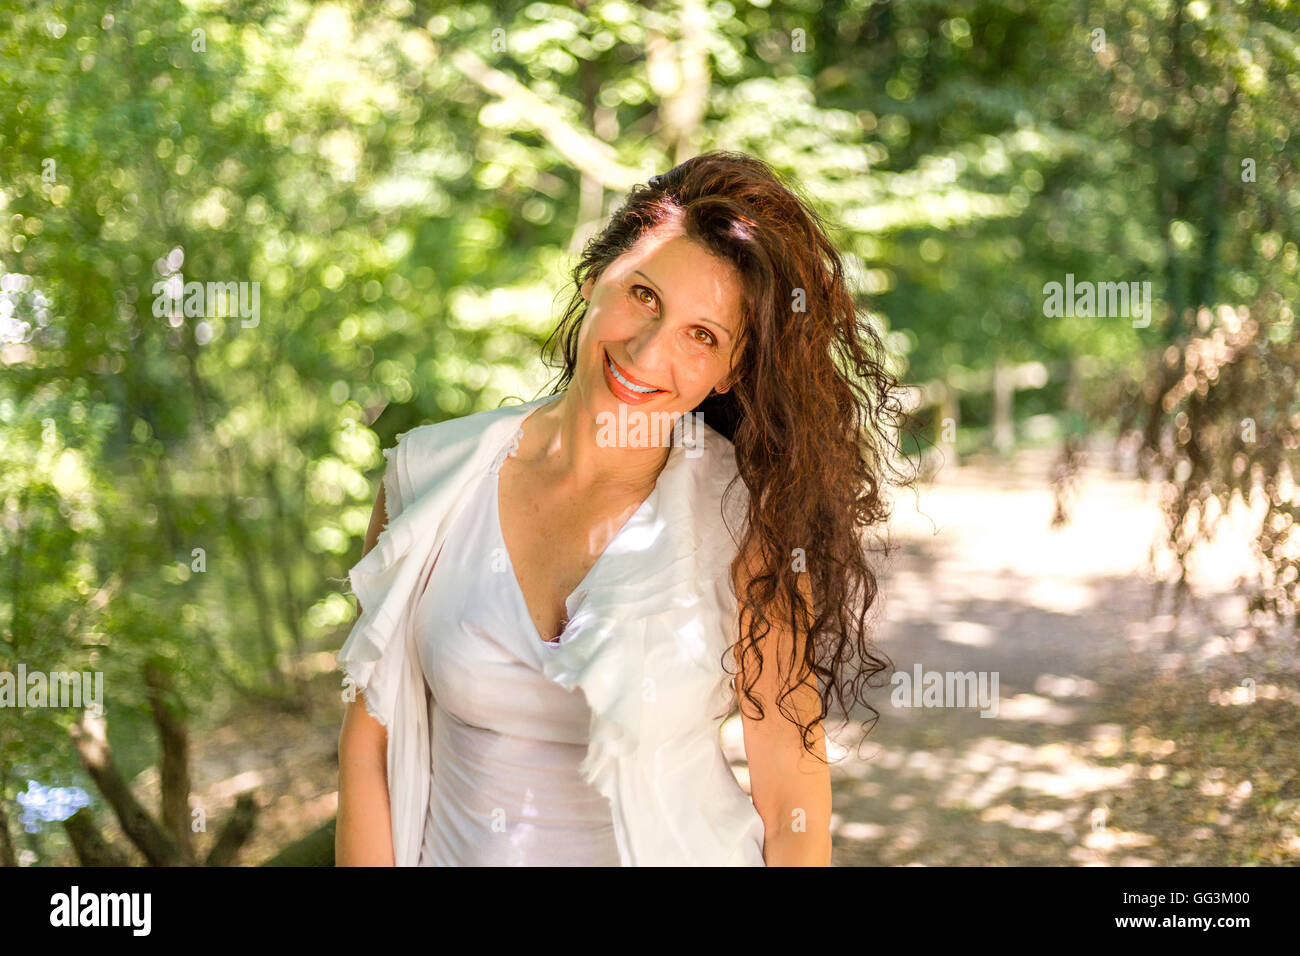 cute mature woman shakes her hair in a garden Stock Photo - Alamy